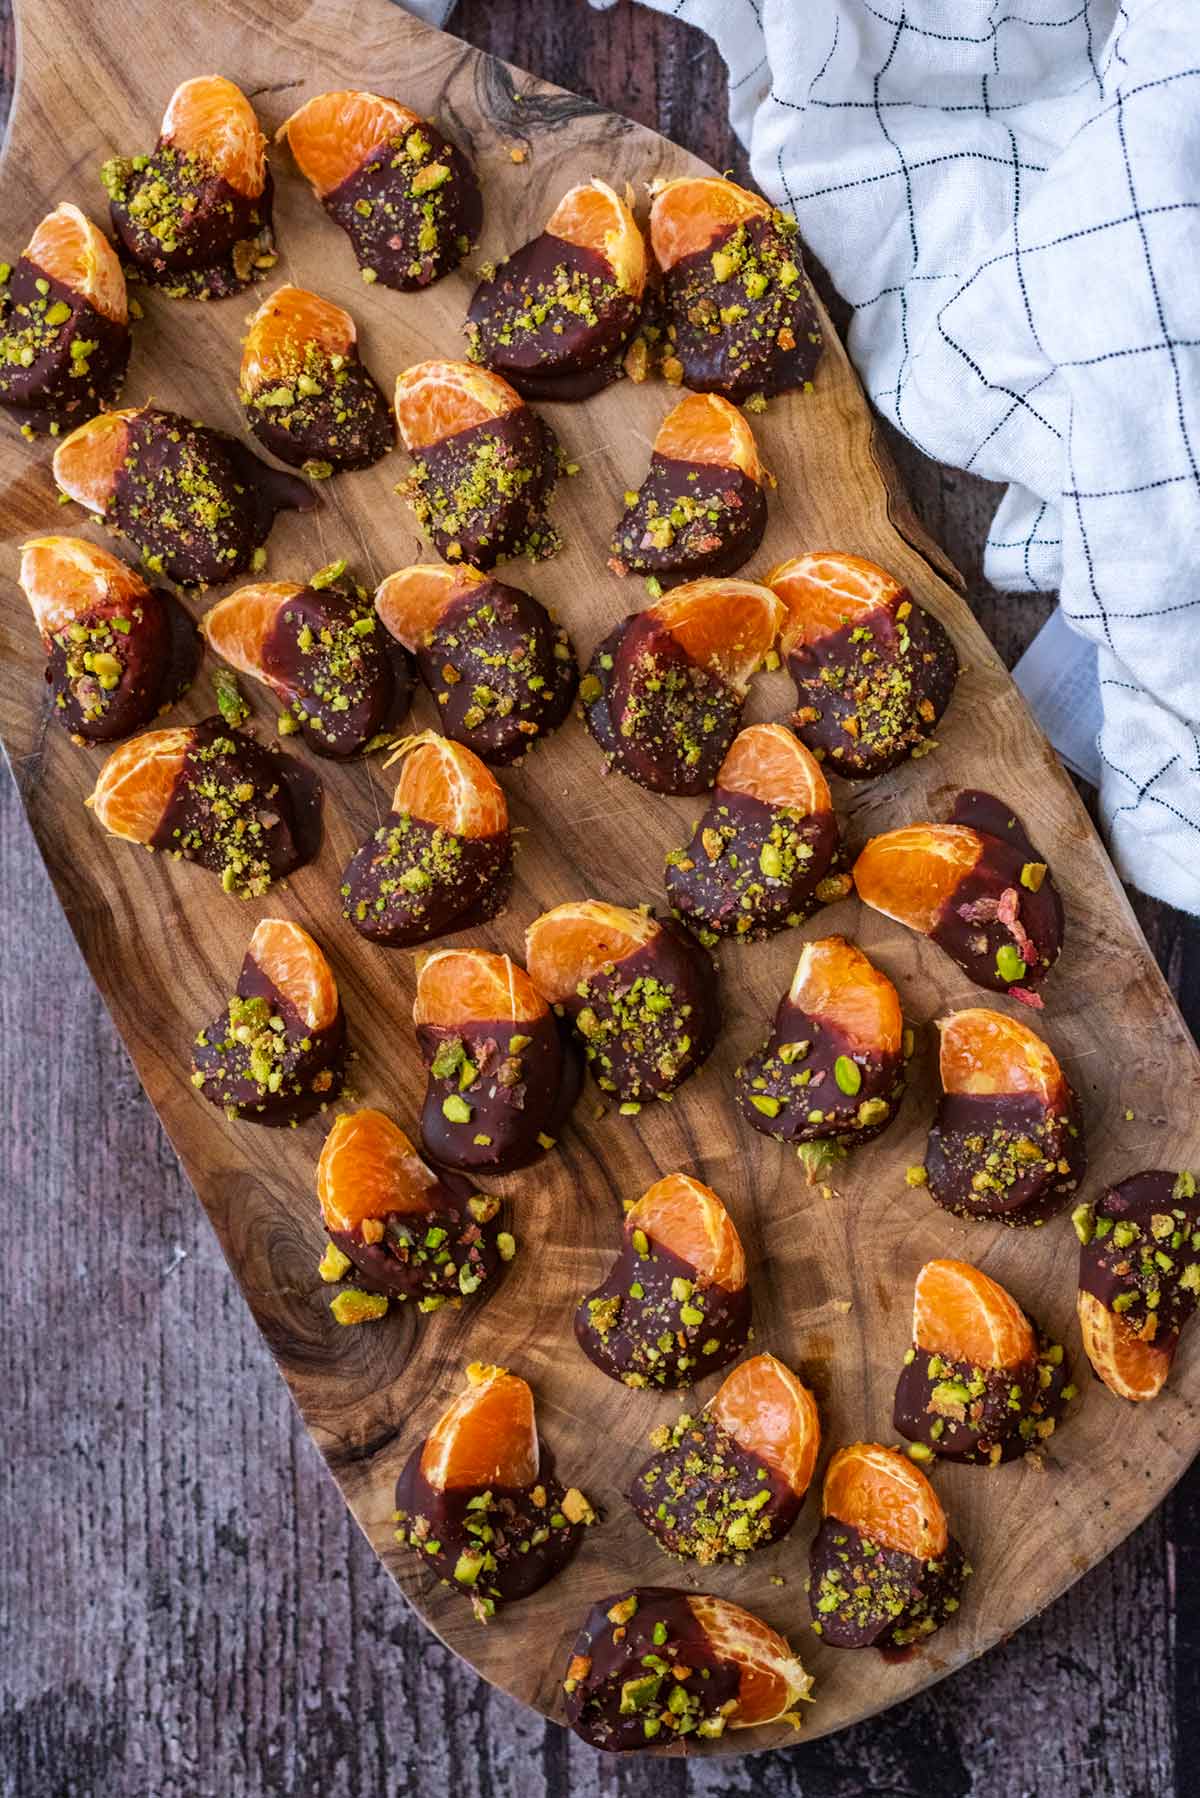 Thirty one satsuma segments, half dipped in chocolate all on a wooden board.